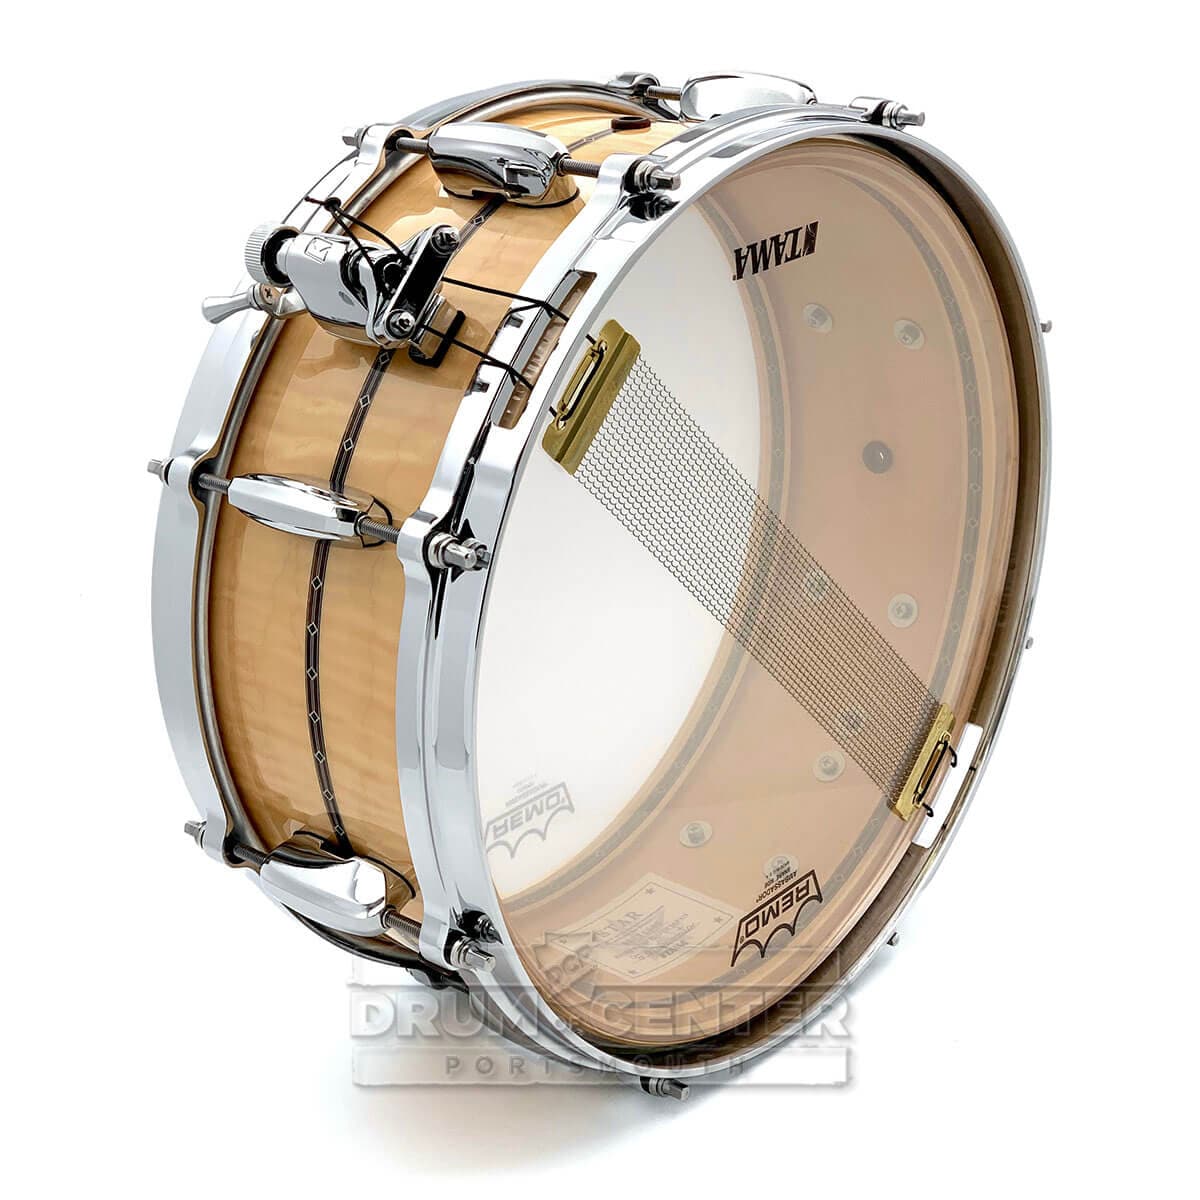 Tama Star Maple Snare Drum 14x5.5 Gloss Natural Curly Maple w